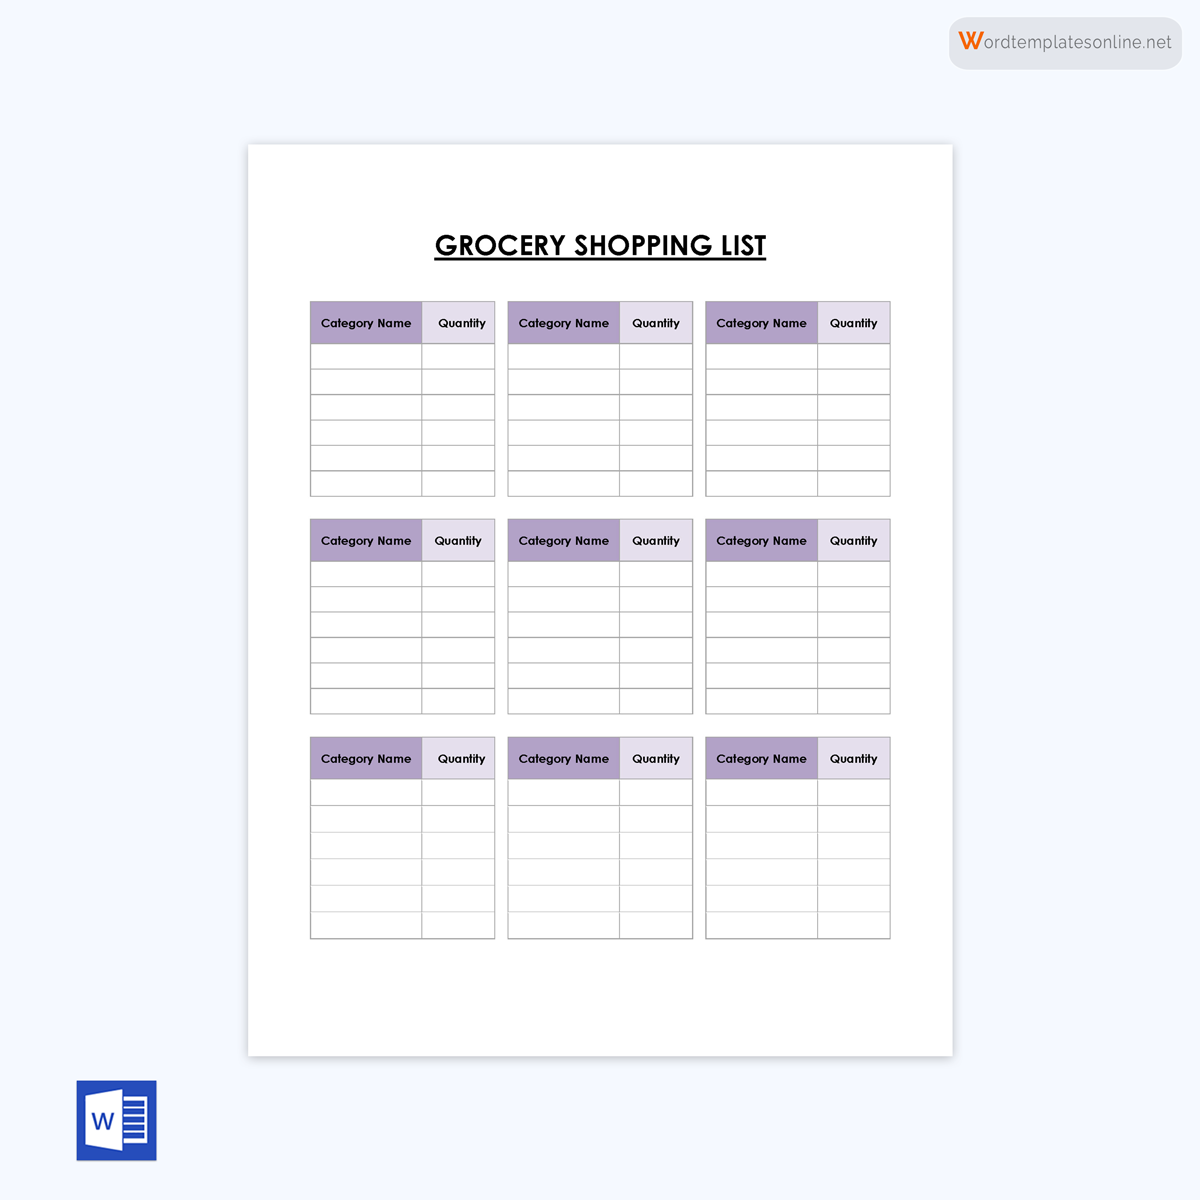 Sample Grocery List Template 04